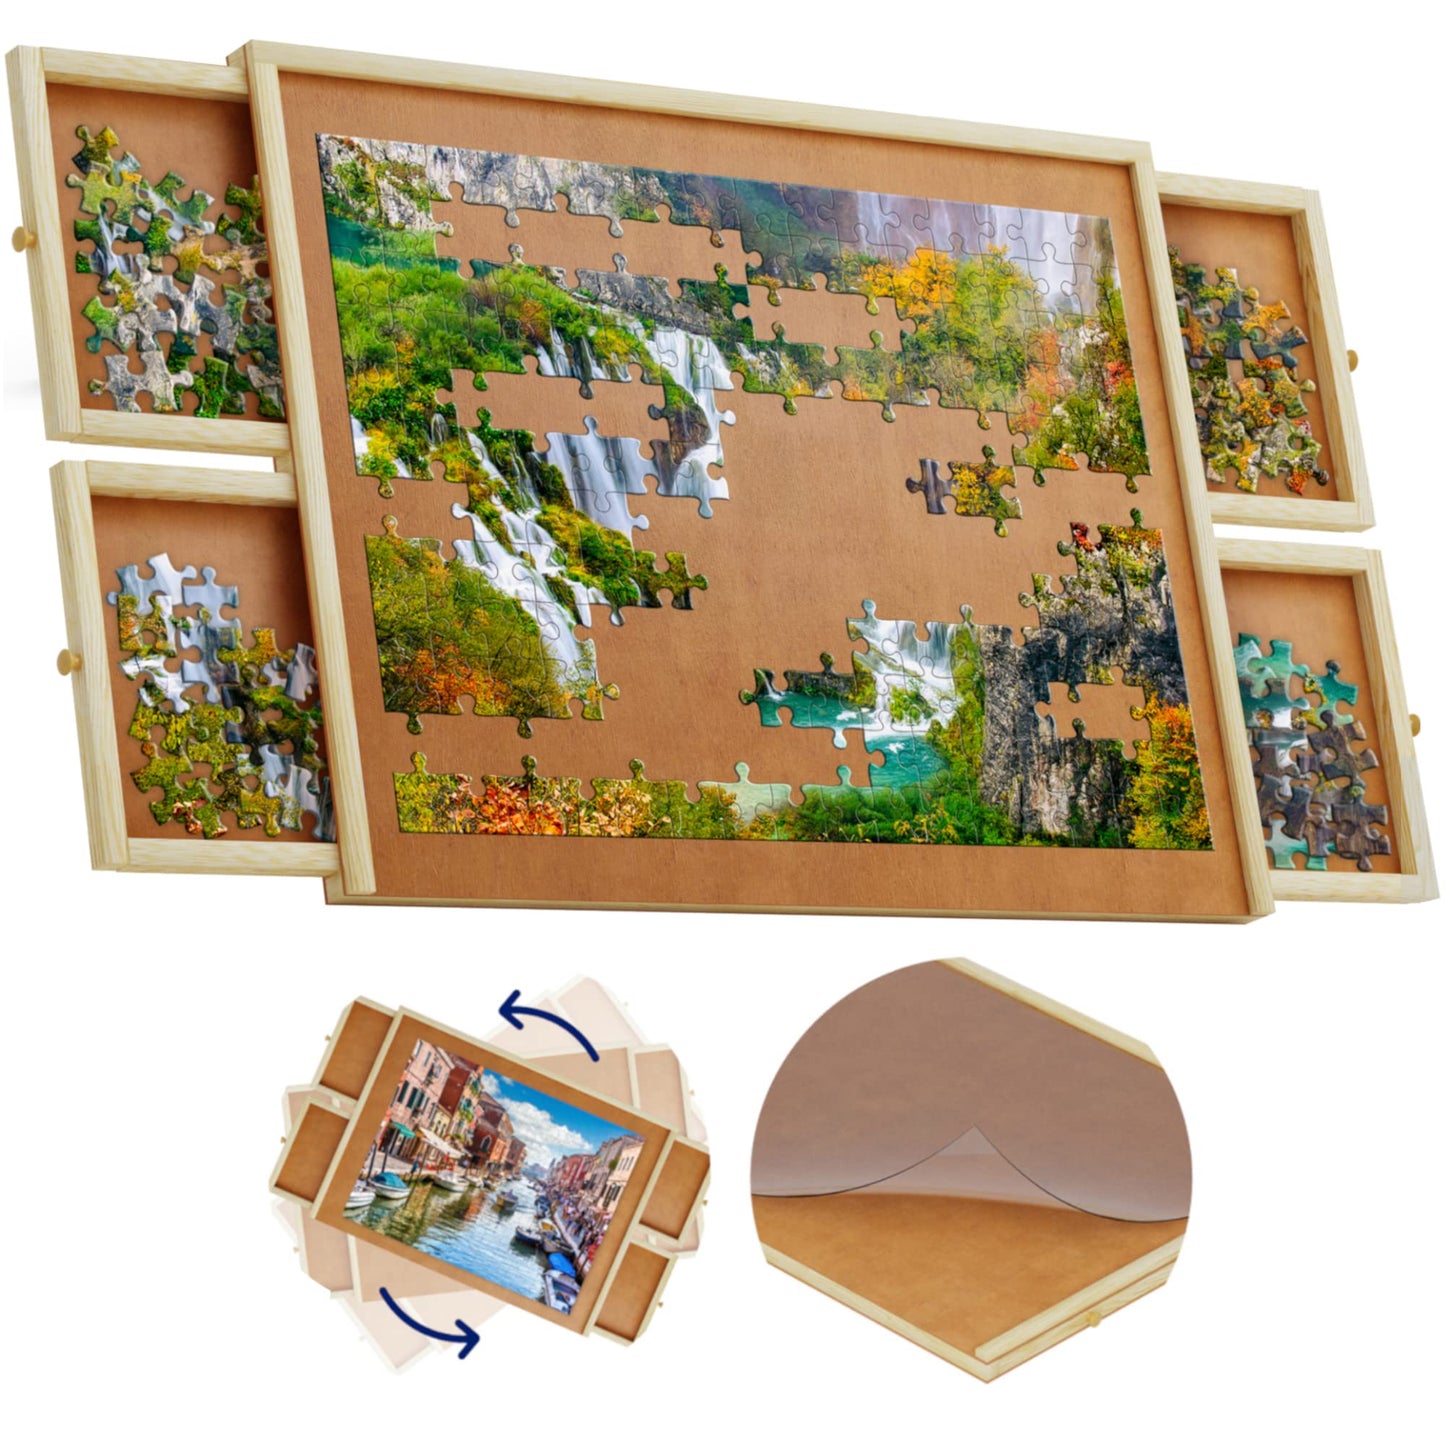 1500 Piece Wooden Jigsaw Puzzle Table - 4 Drawers, Rotating Puzzle Board | 35” X 28” Jigsaw Puzzle Board | Puzzle Cover Included - Portable Puzzle Tables for Adults and Kids by Beyond Innoventions